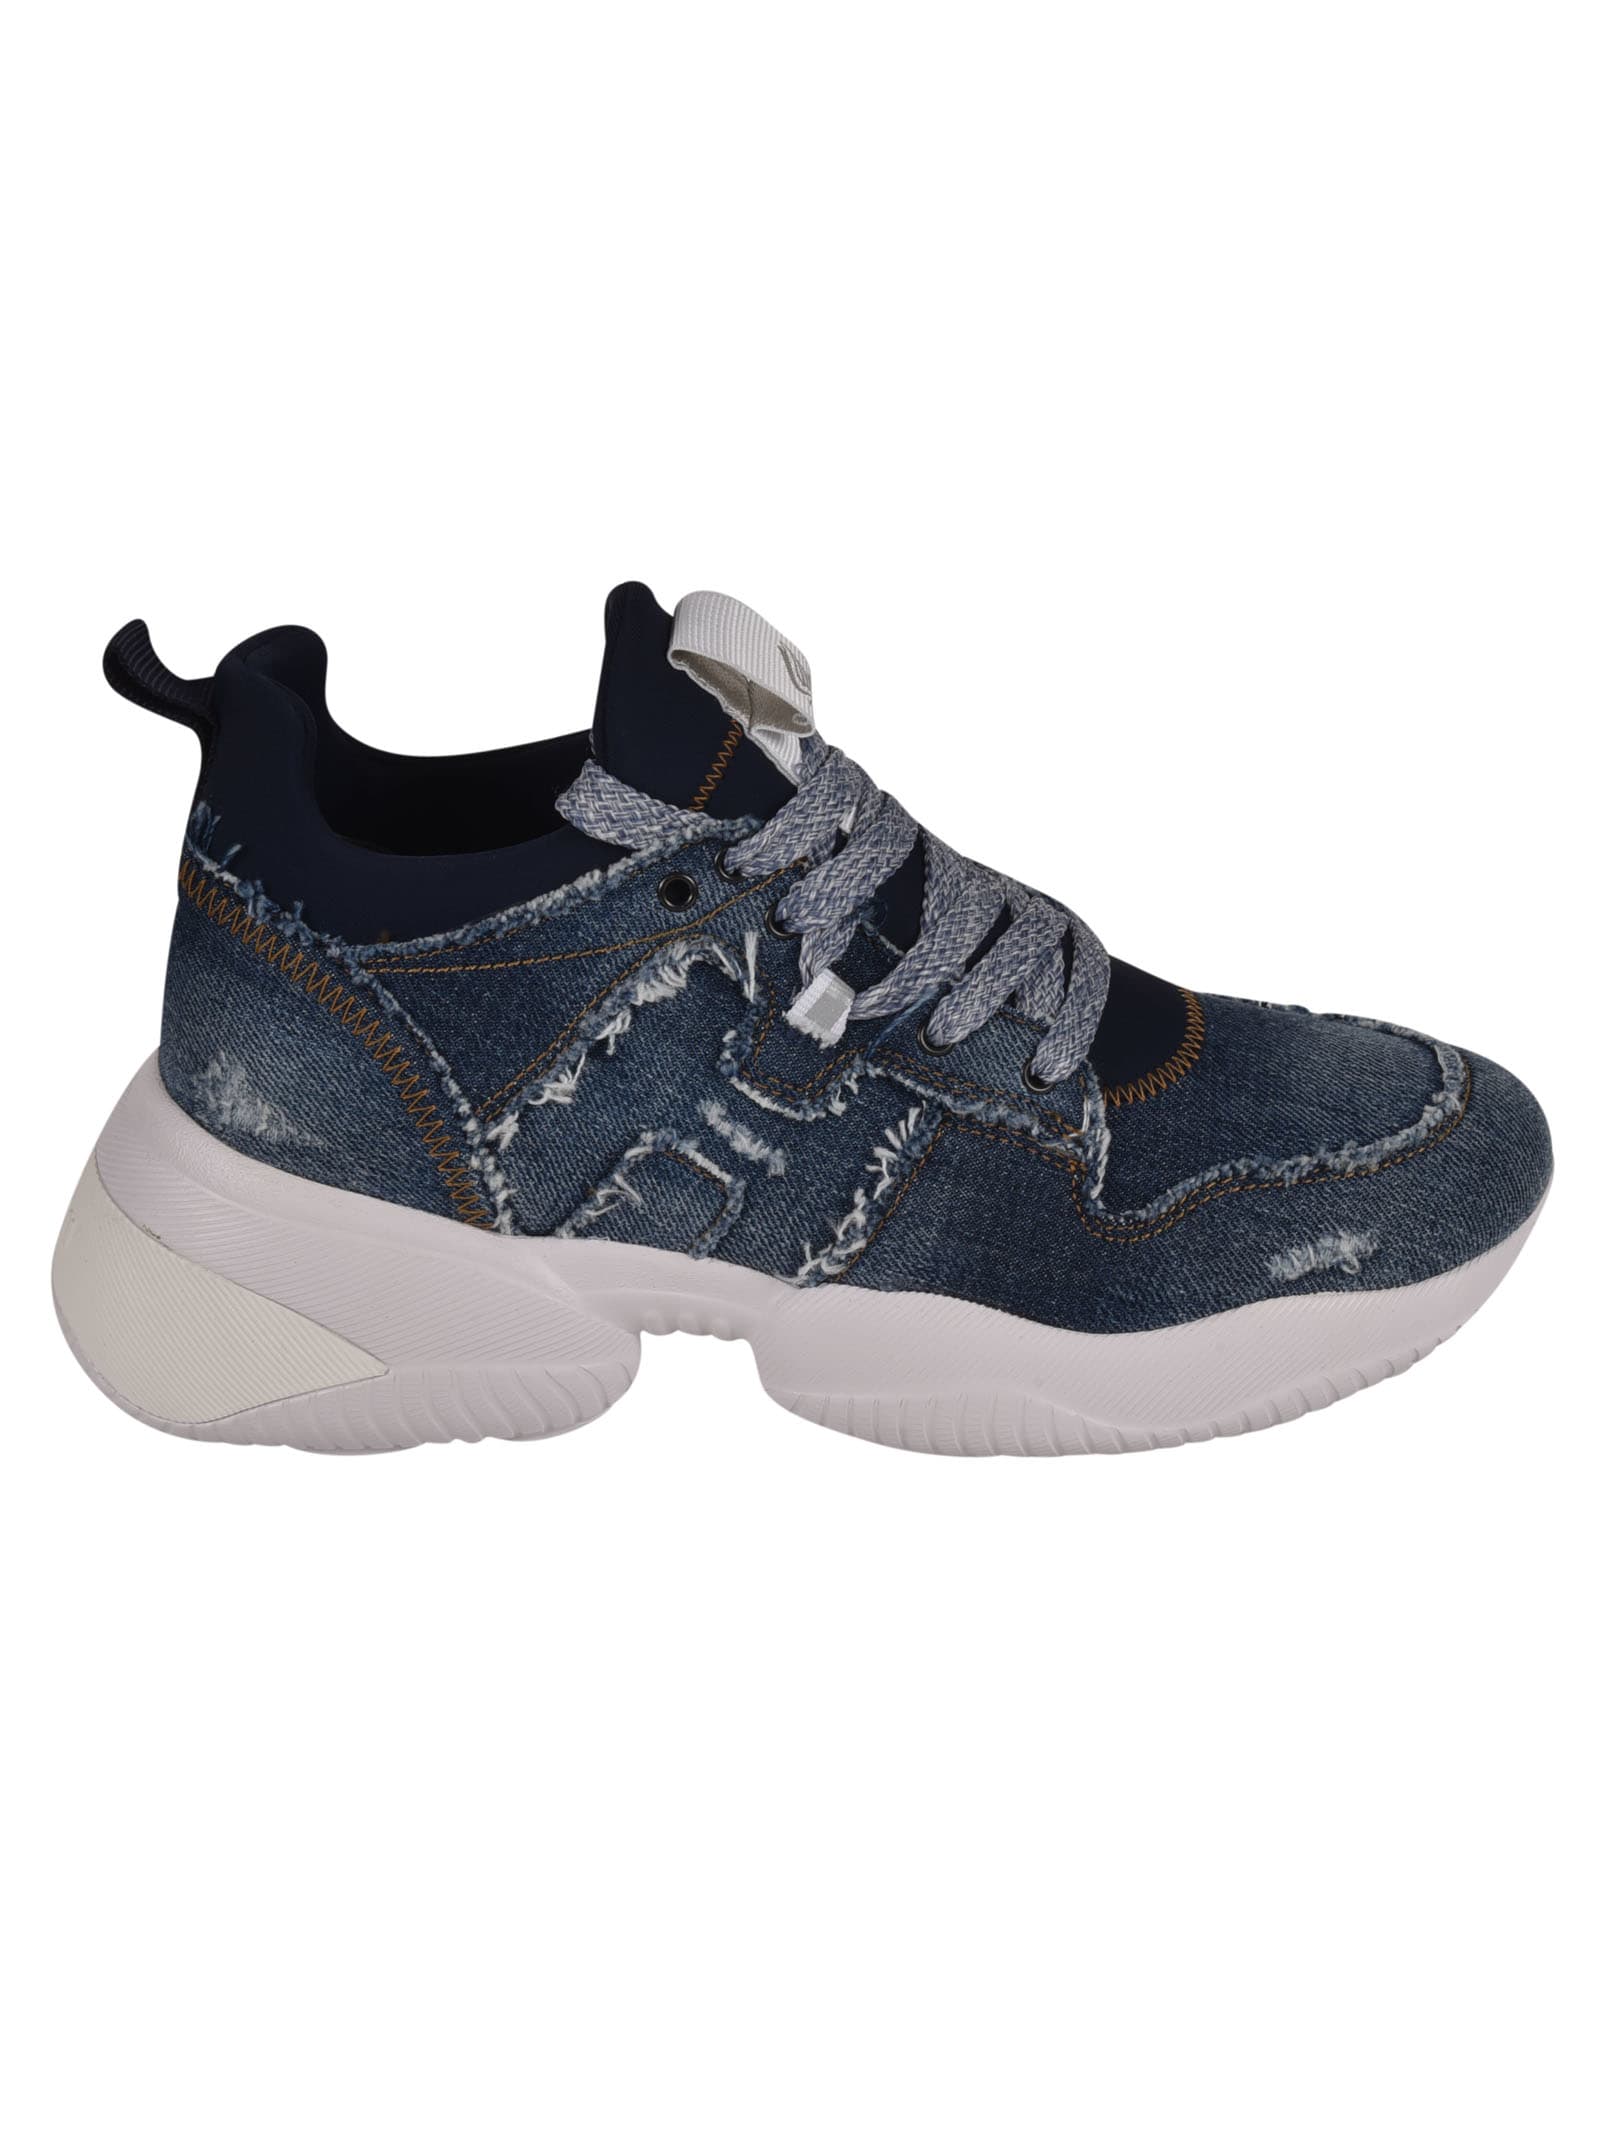 HOGAN INTERACTION JEANS trainers,HXW5250CH28 NXD 2482